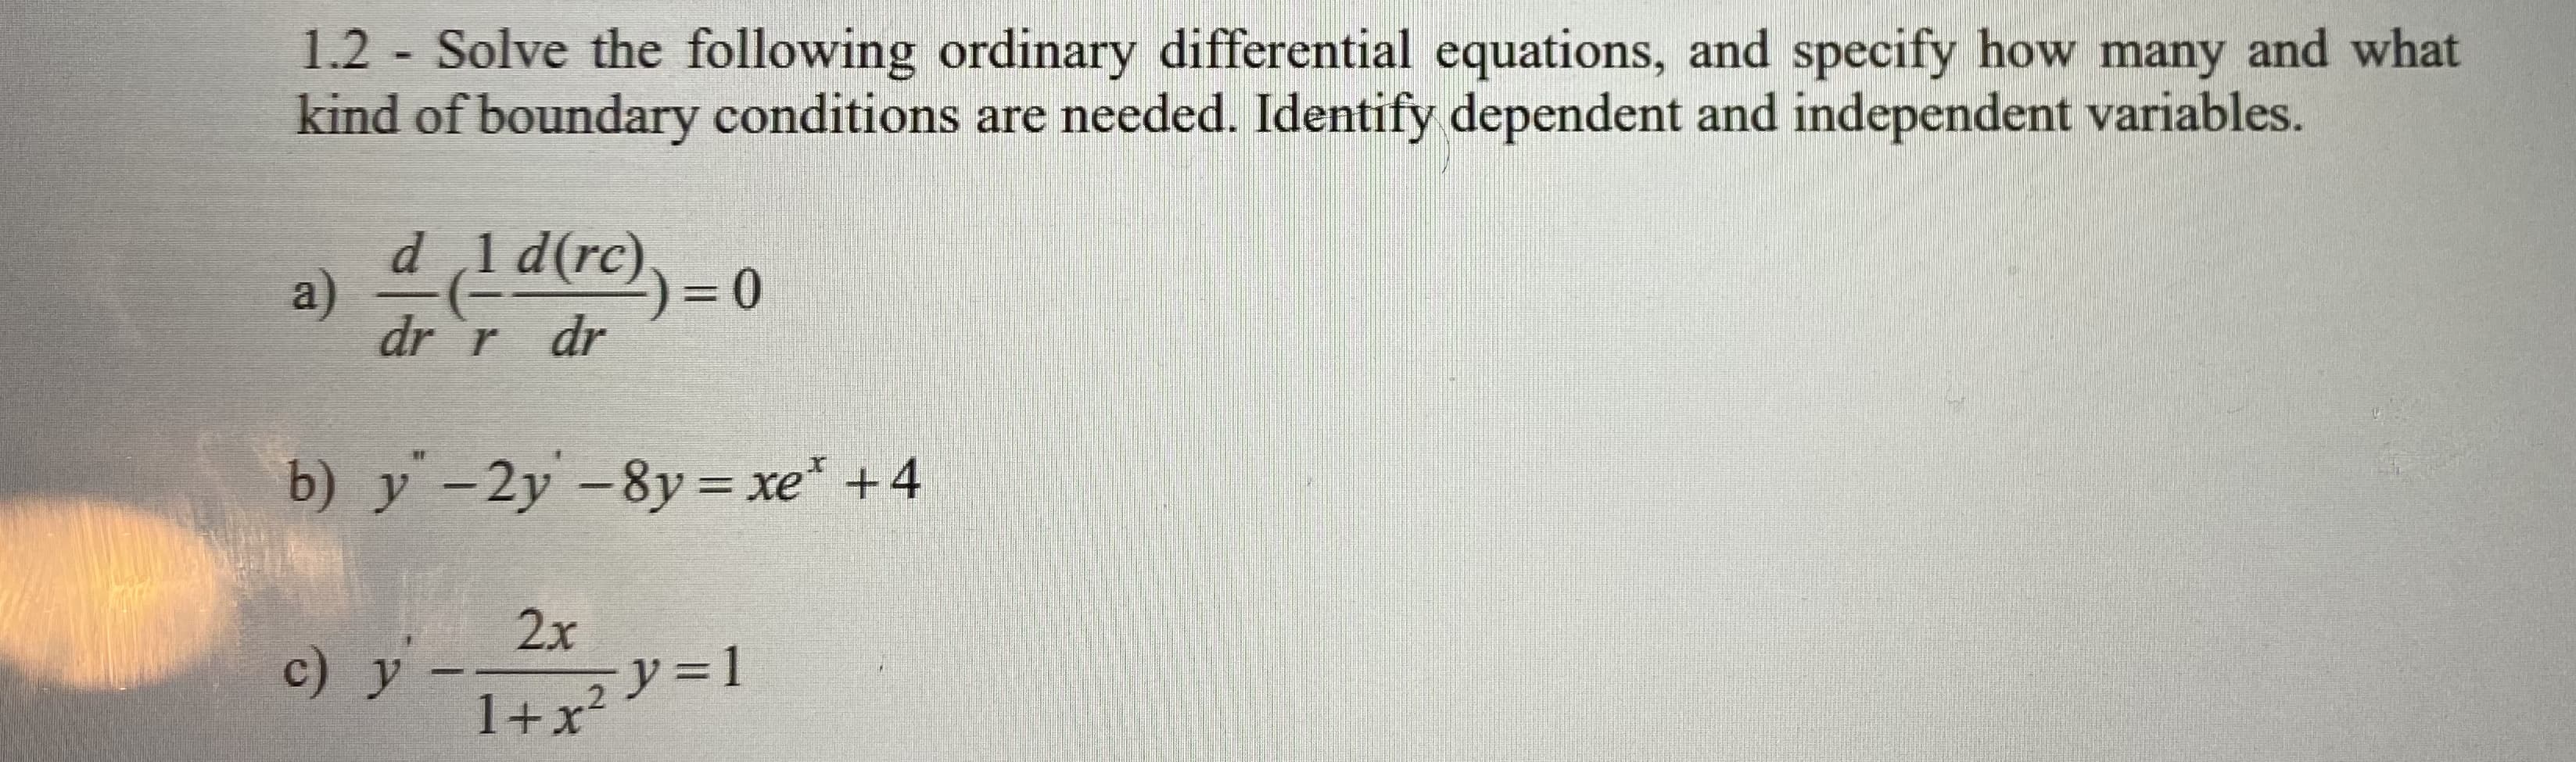 1.2 Solve the following ordinary differential equations, and specify how many and what
kind of boundary conditions are needed. Identify dependent and independent variables.
d 1d(rc),= 0
dr `r dr
b) y -2y -8y= xe* +4
%3D
2x
c) y
1+x²V=1
